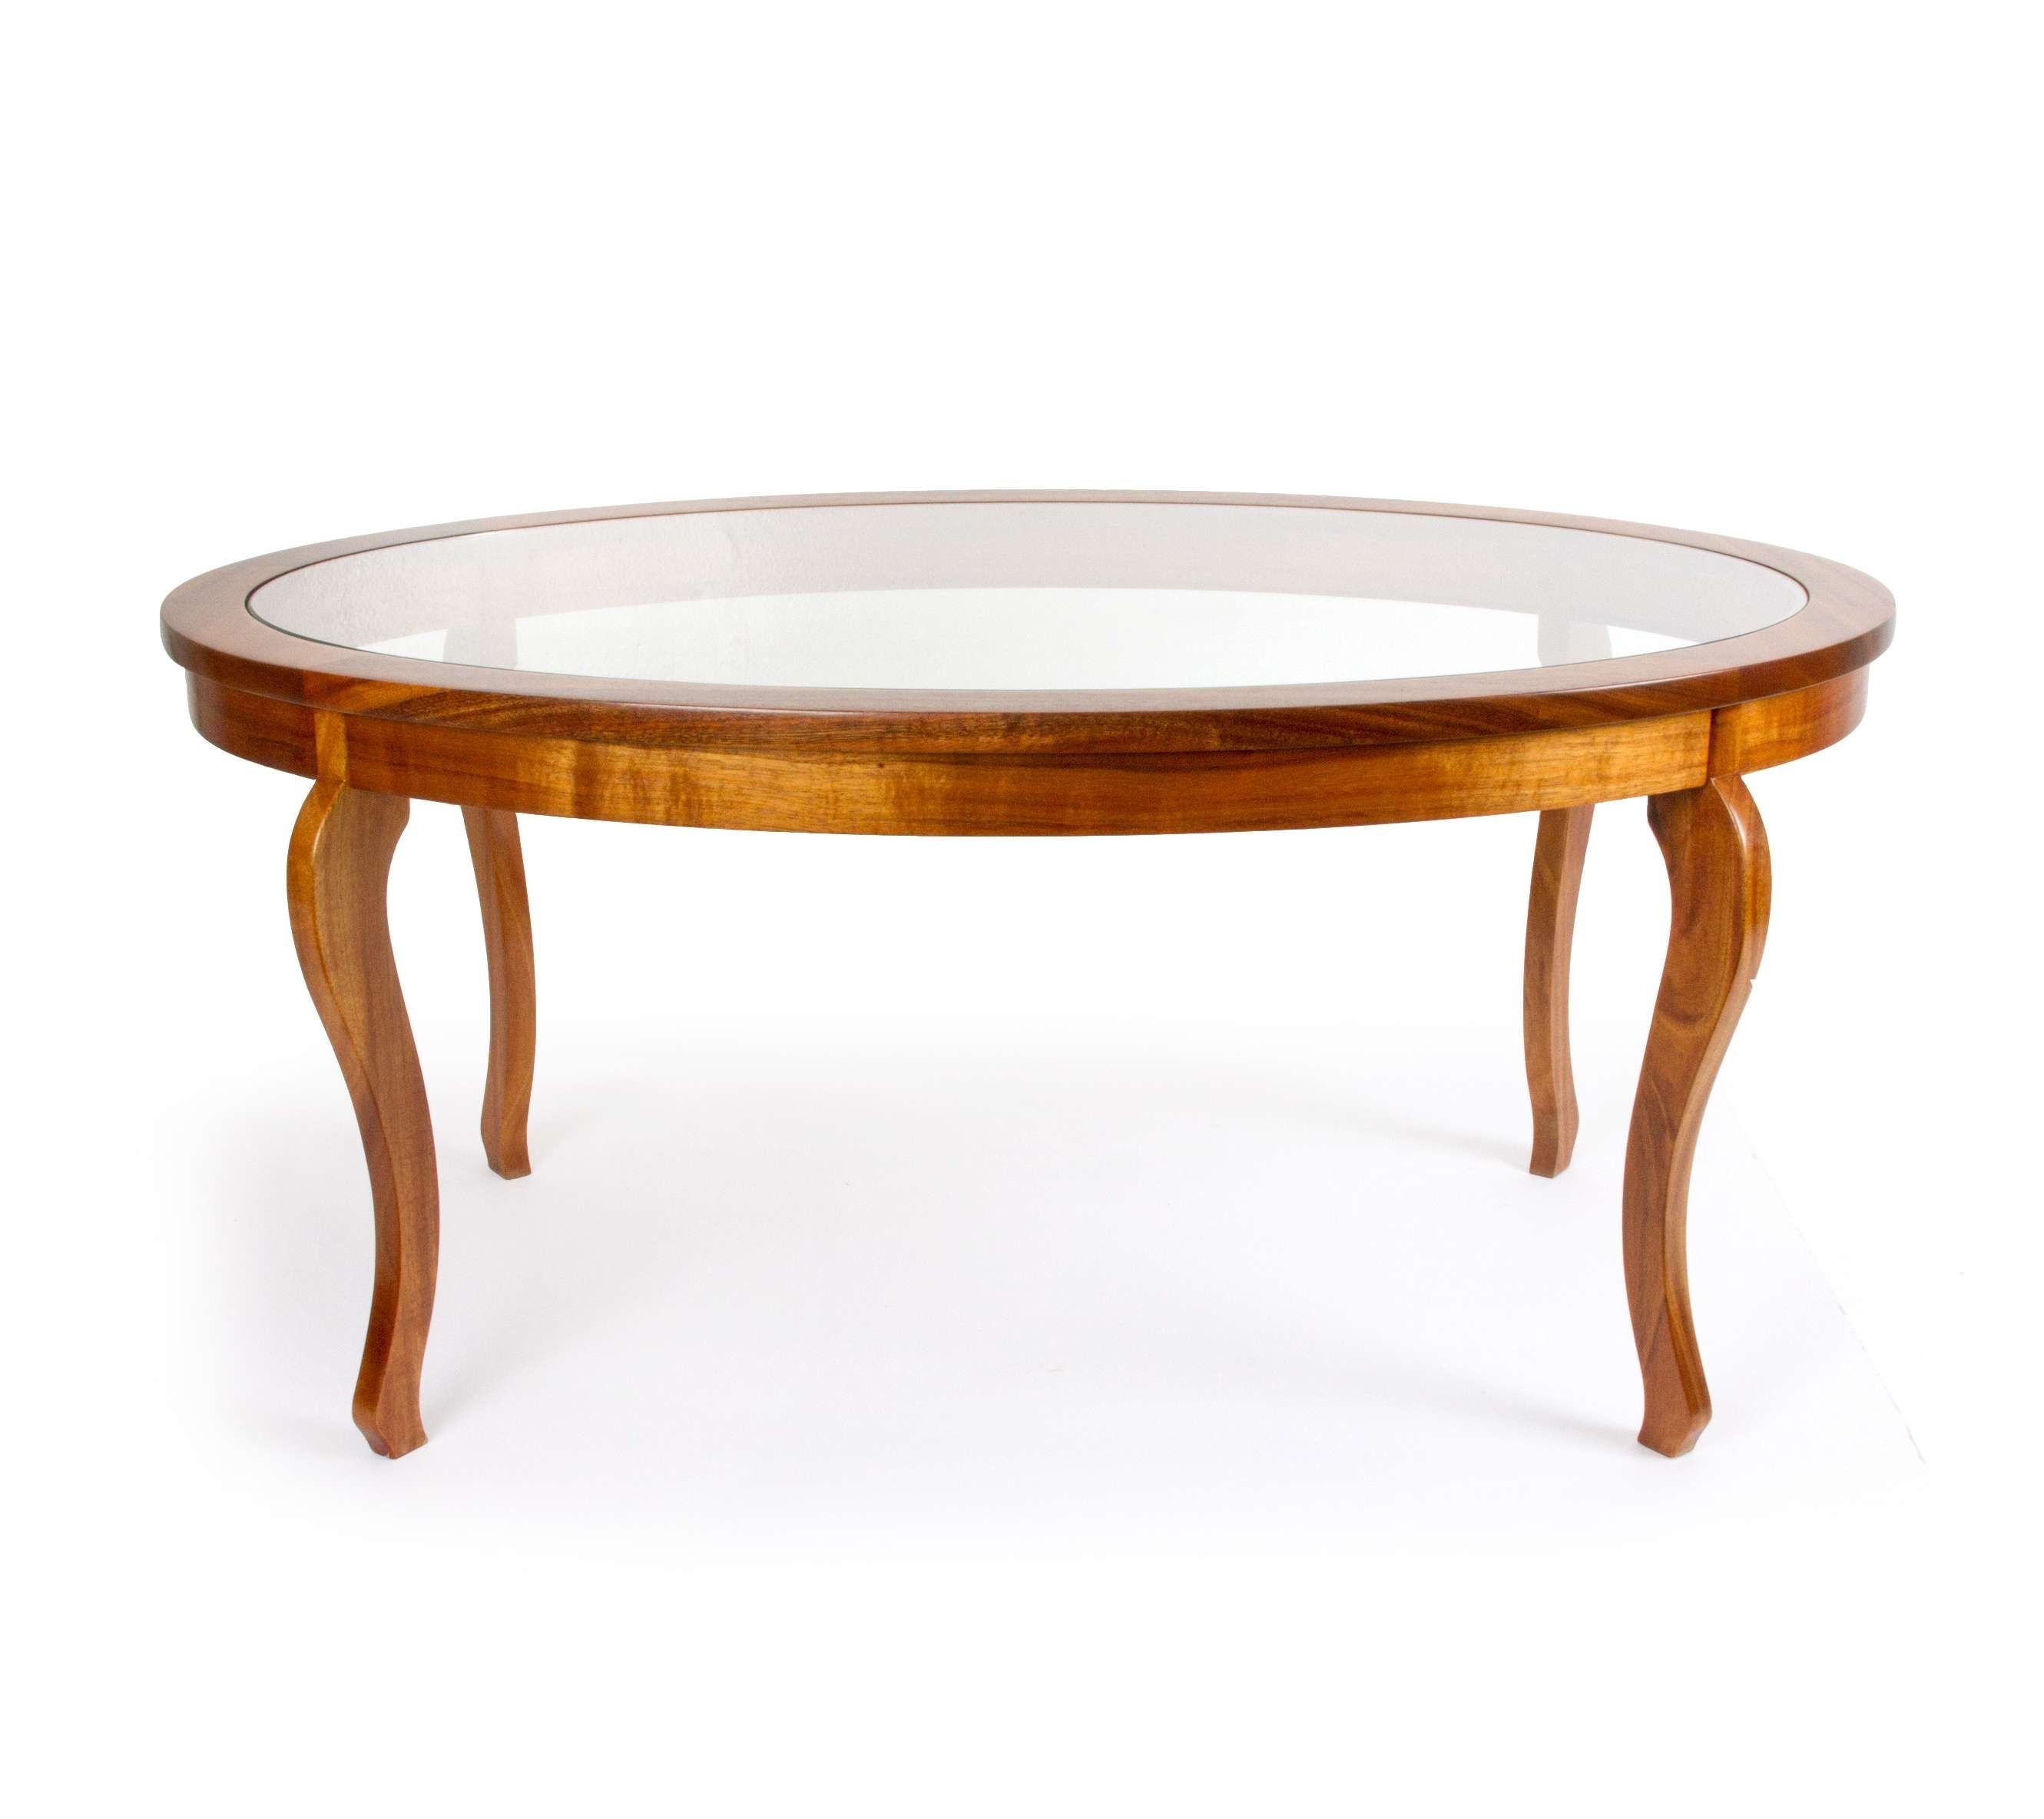 Oval Coffee Table With Glass Top And High Legs For Small Rustic Throughout Newest Oval Glass And Wood Coffee Tables (View 8 of 20)